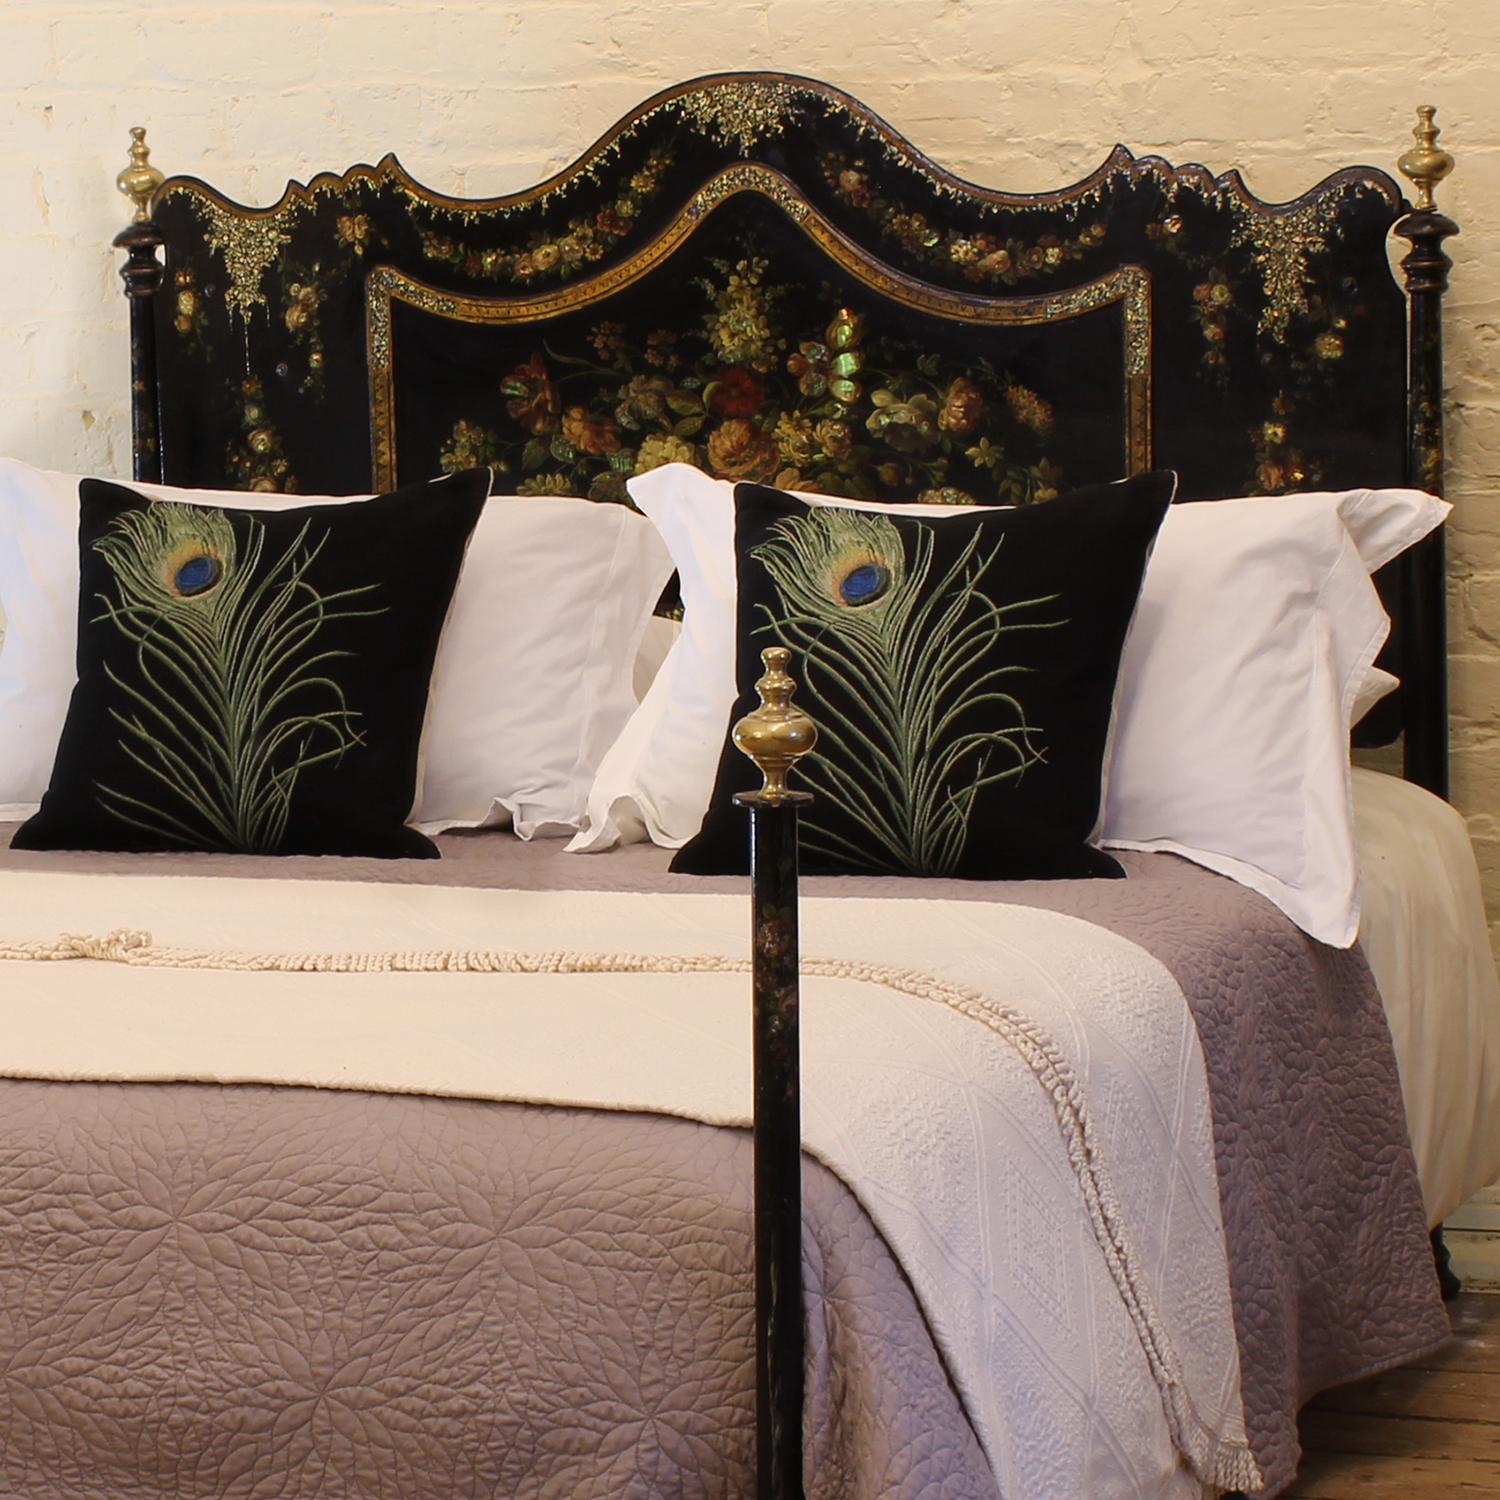 This magnificent ebony hand-painted bed with mother-of-pearl and gilt decoration dates from the early Twentieth Century and originates from England. An exceptional piece possibly commissioned for a particular home in the UK, this unusual bed has a